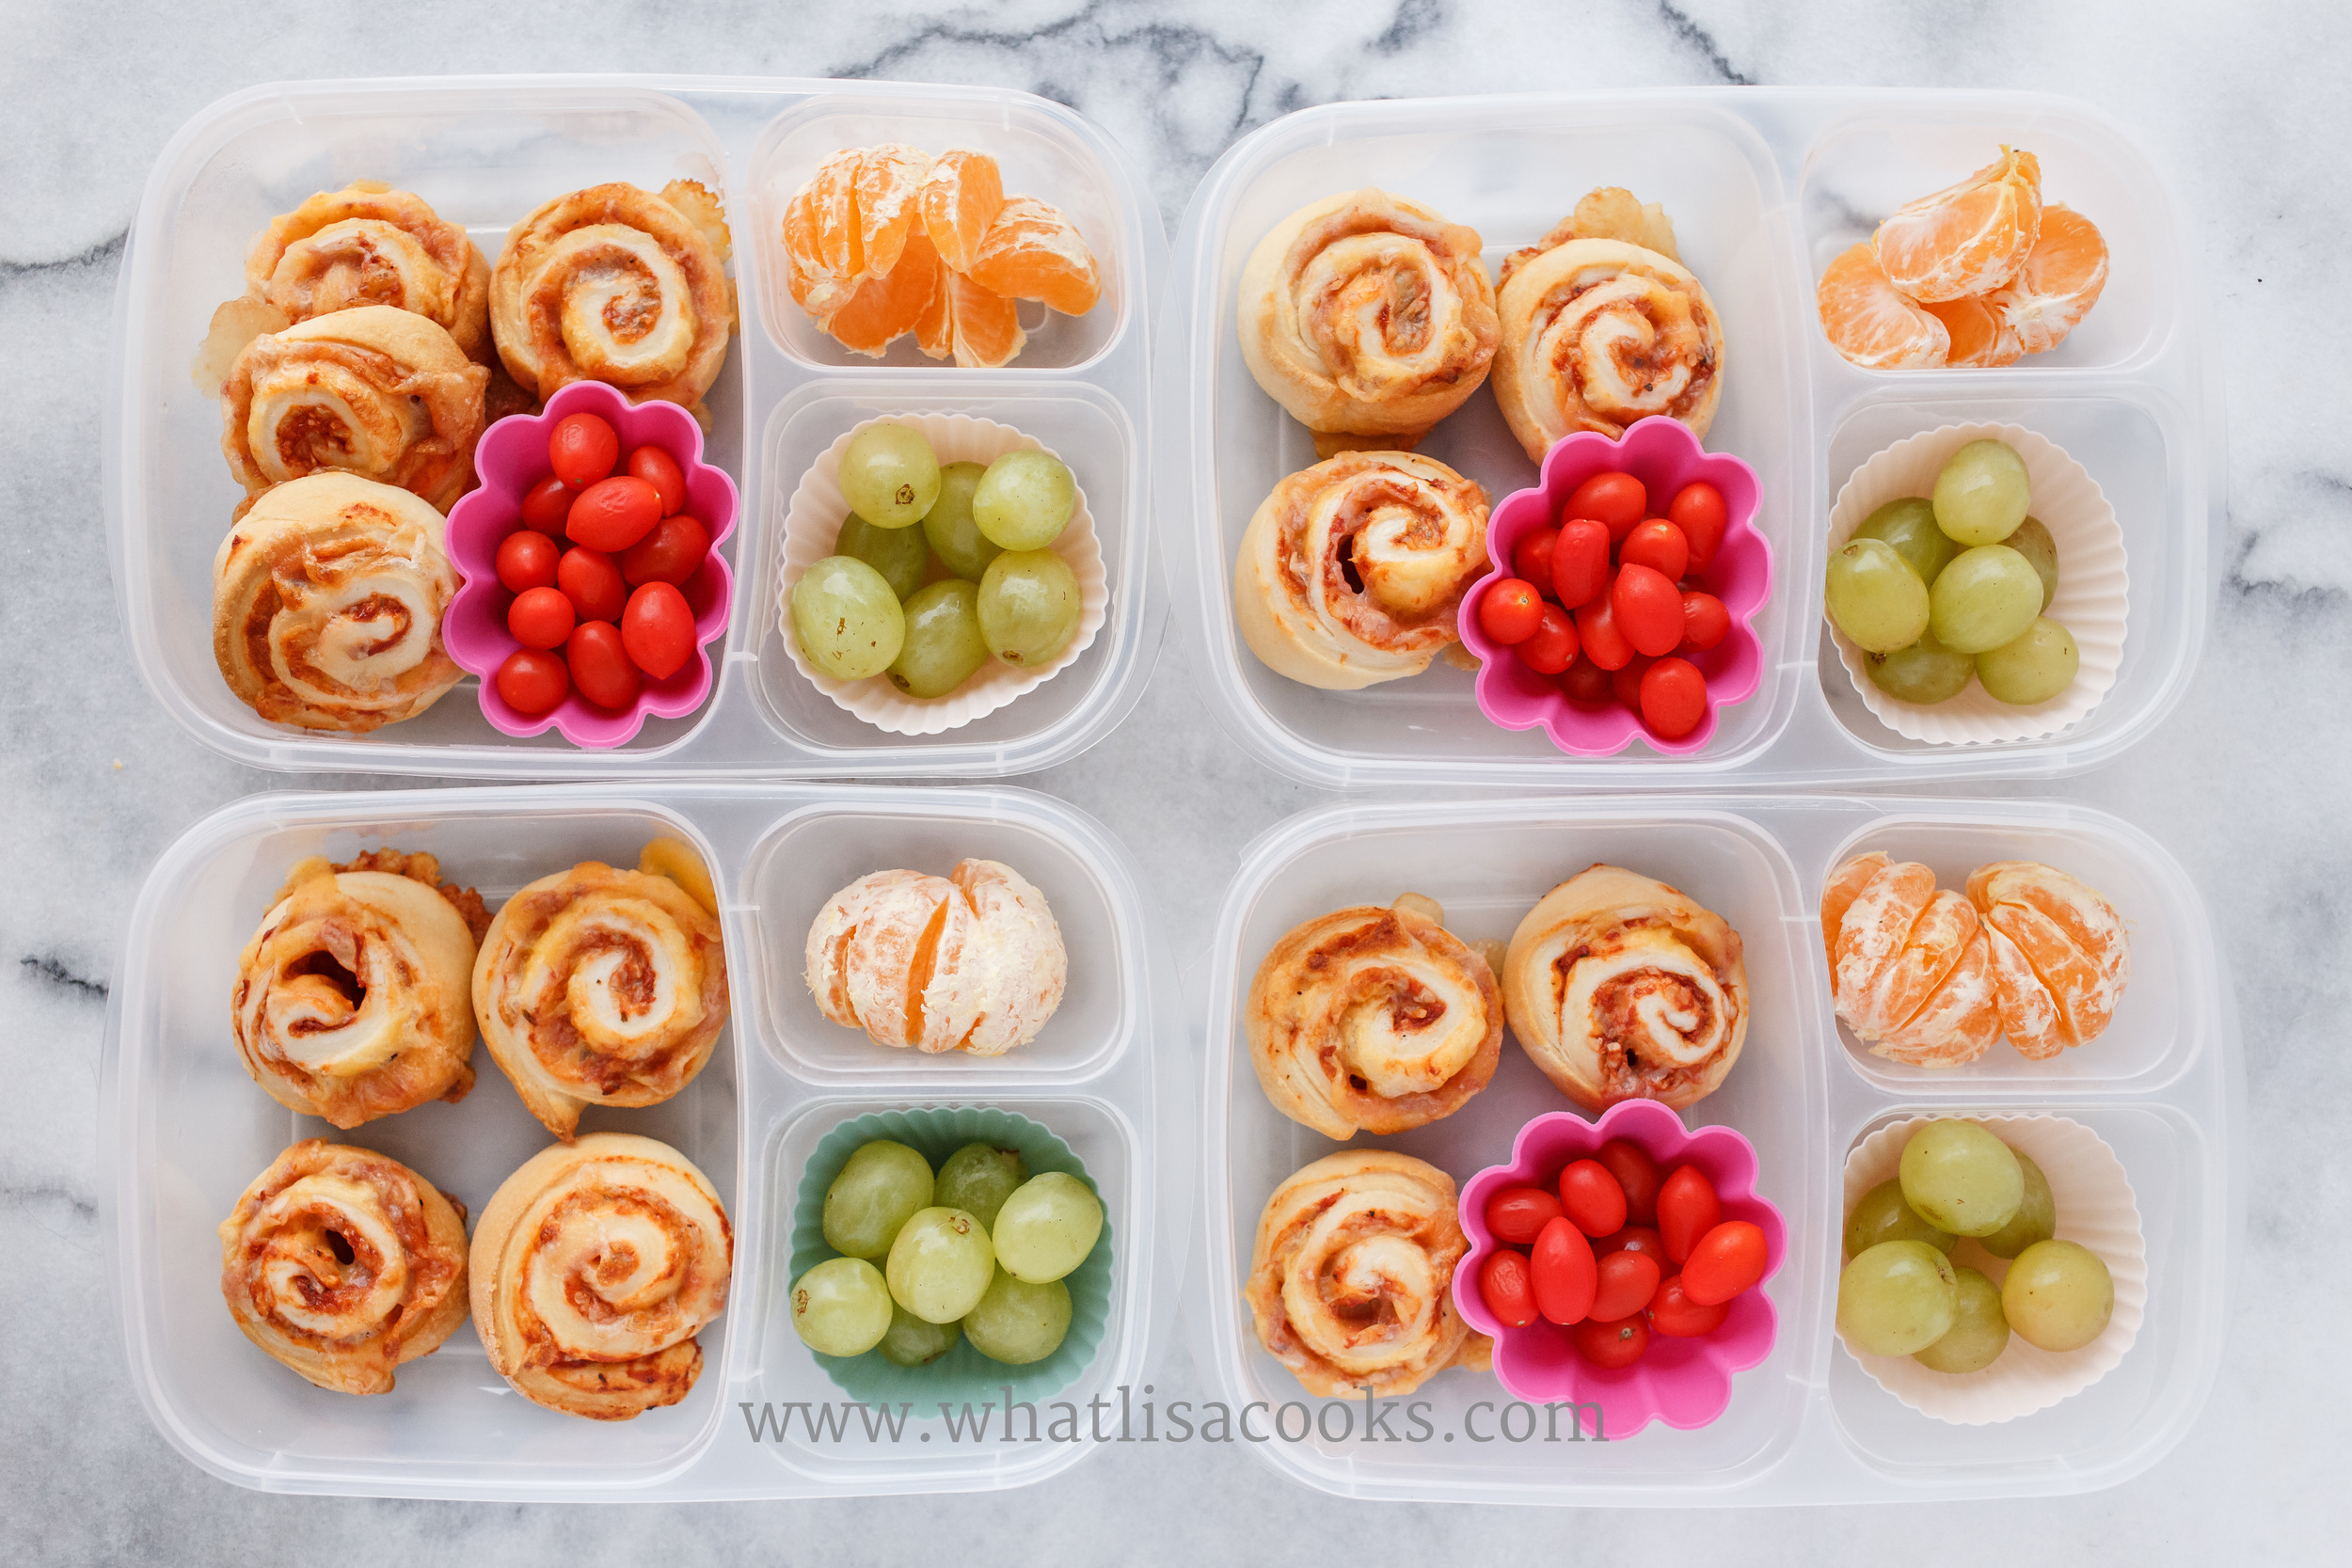 15 Easy Packed Lunch Ideas - Healthy Lunches for Packing